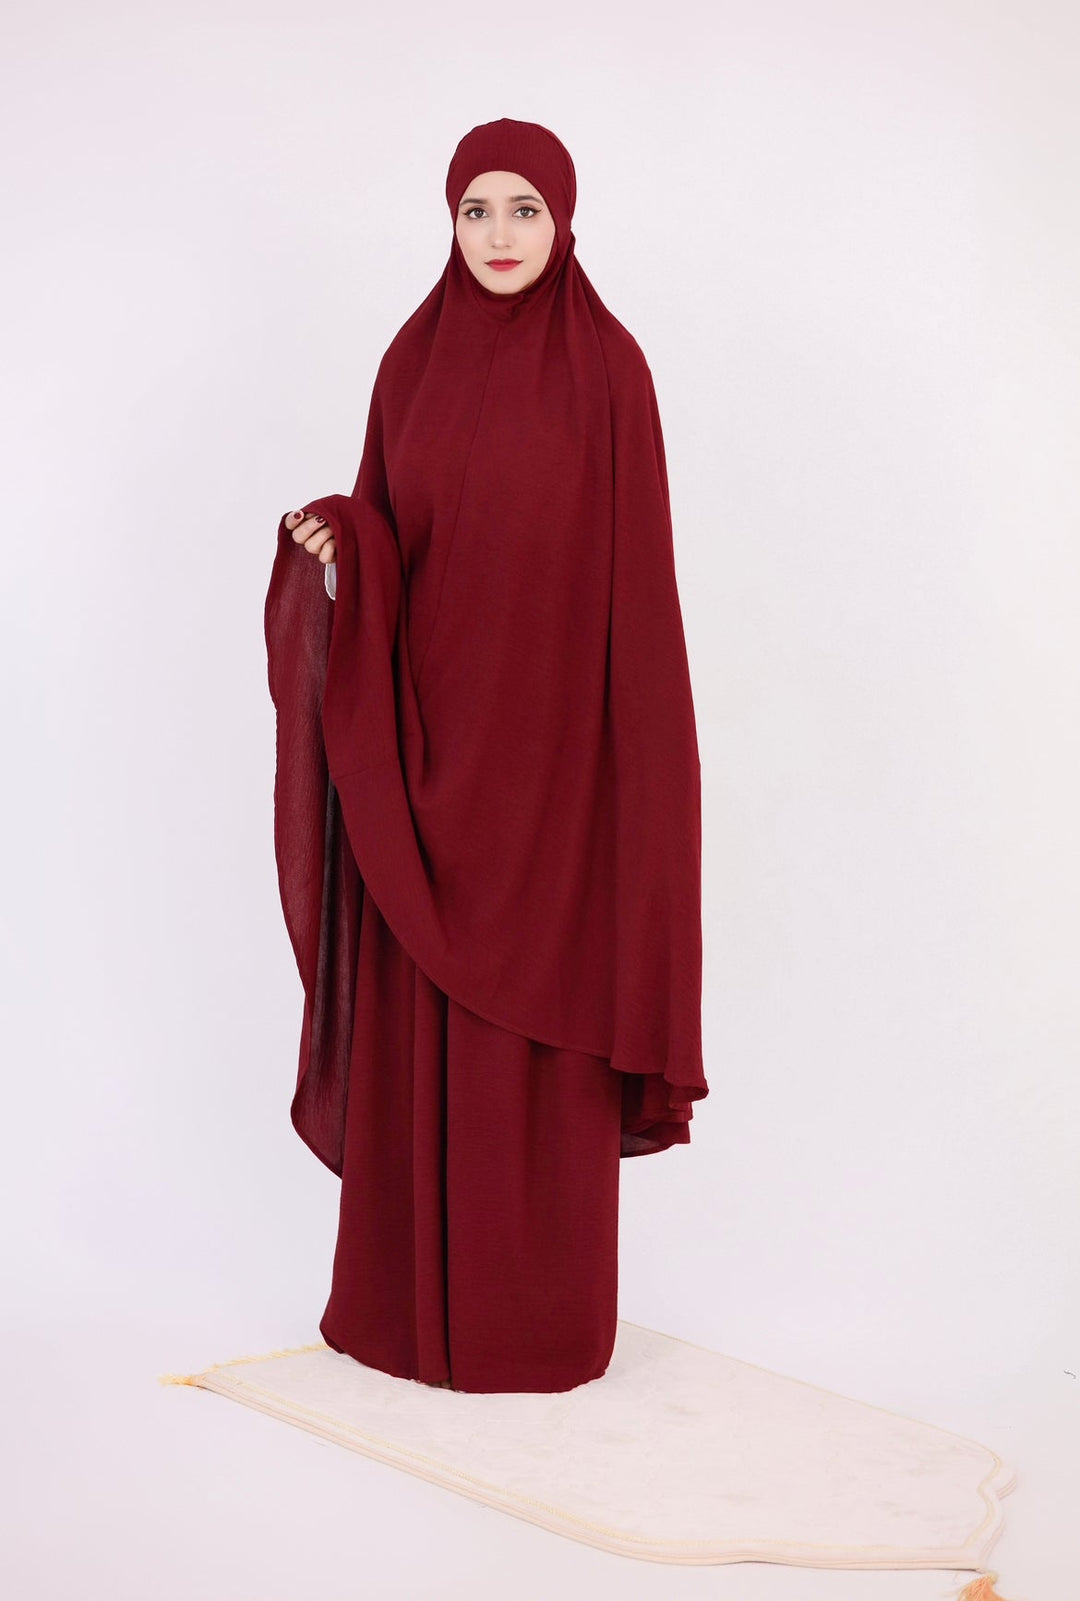 Get trendy with Textured Prayer Set - Wine - Skirts available at Voilee NY. Grab yours for $55 today!